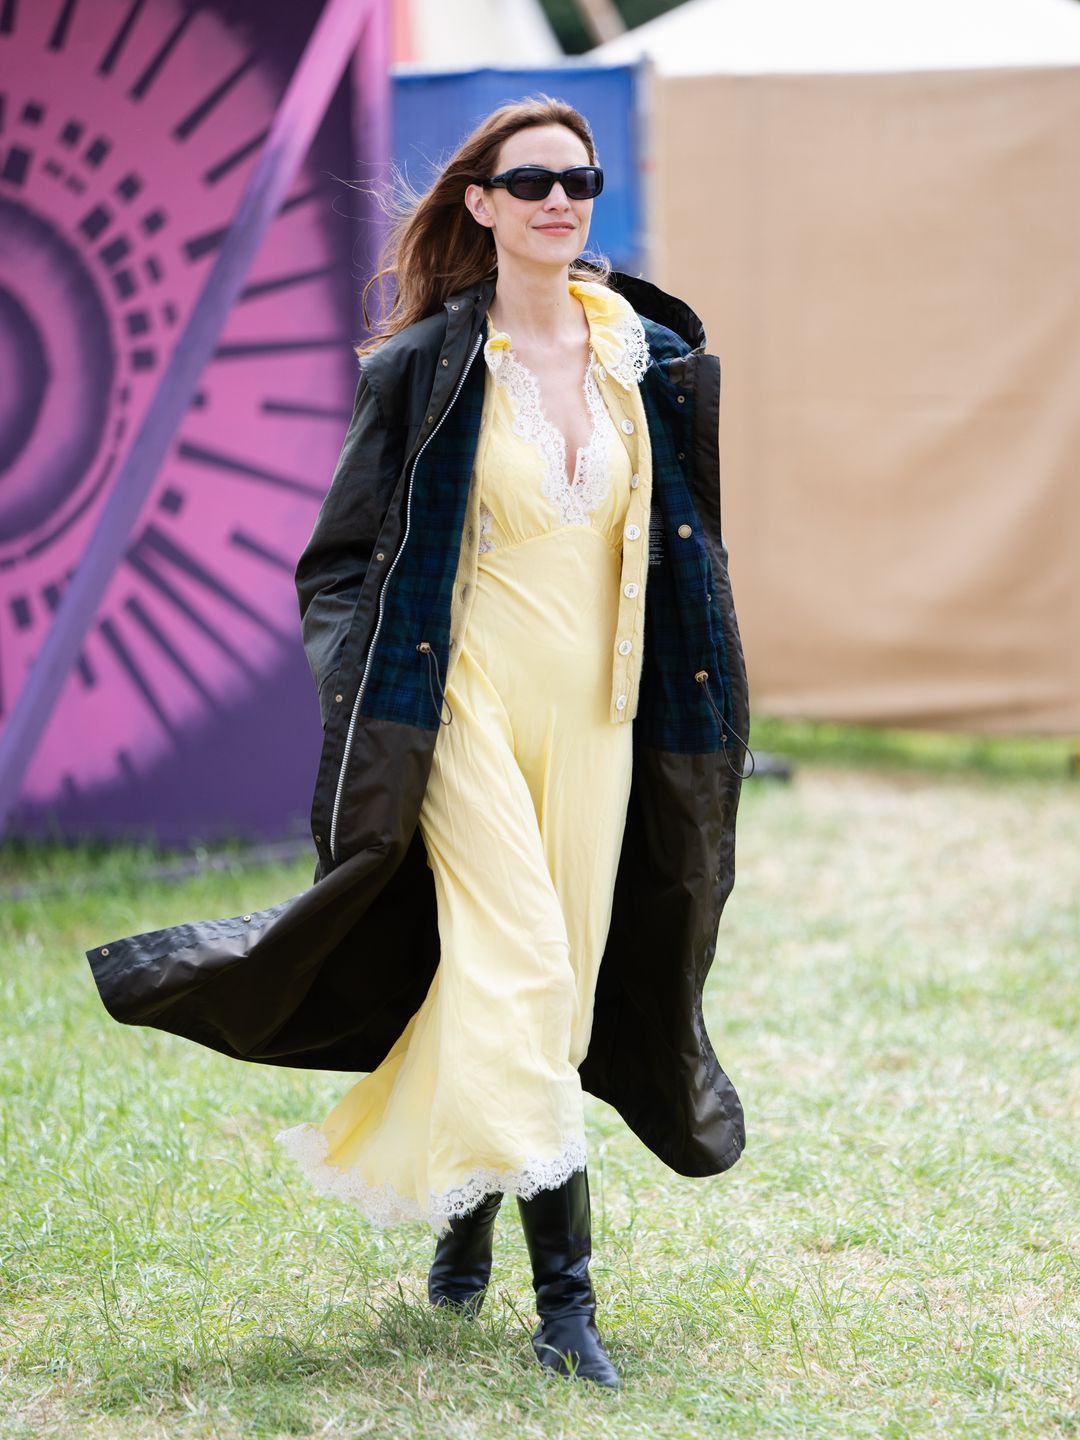 Alexa Chung on day three of Glastonbury in a yellow slip dress and jacket from the Barbour collaboration.